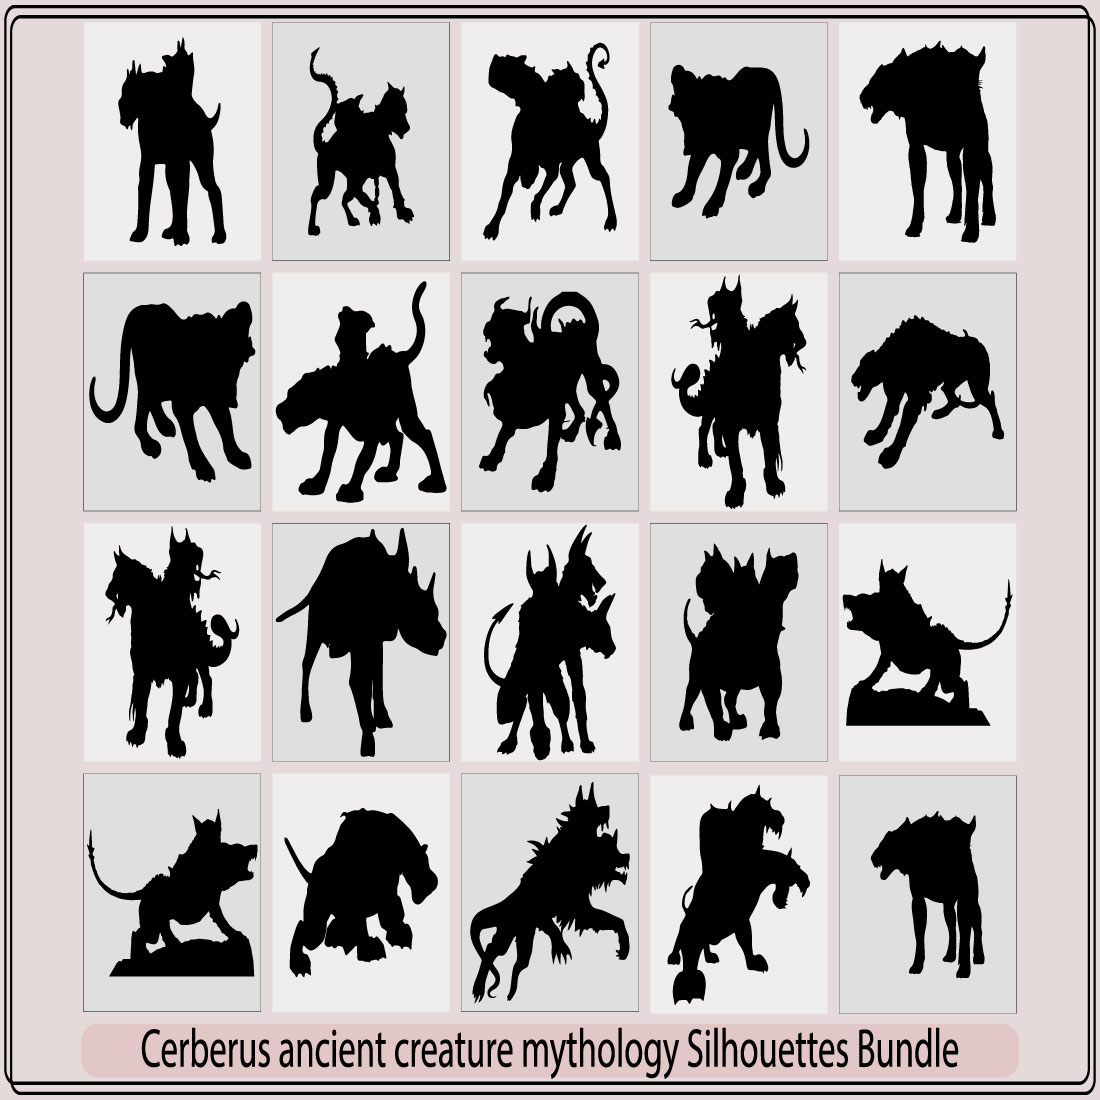 Cerberus ancient creature mythology silhouette cover image.